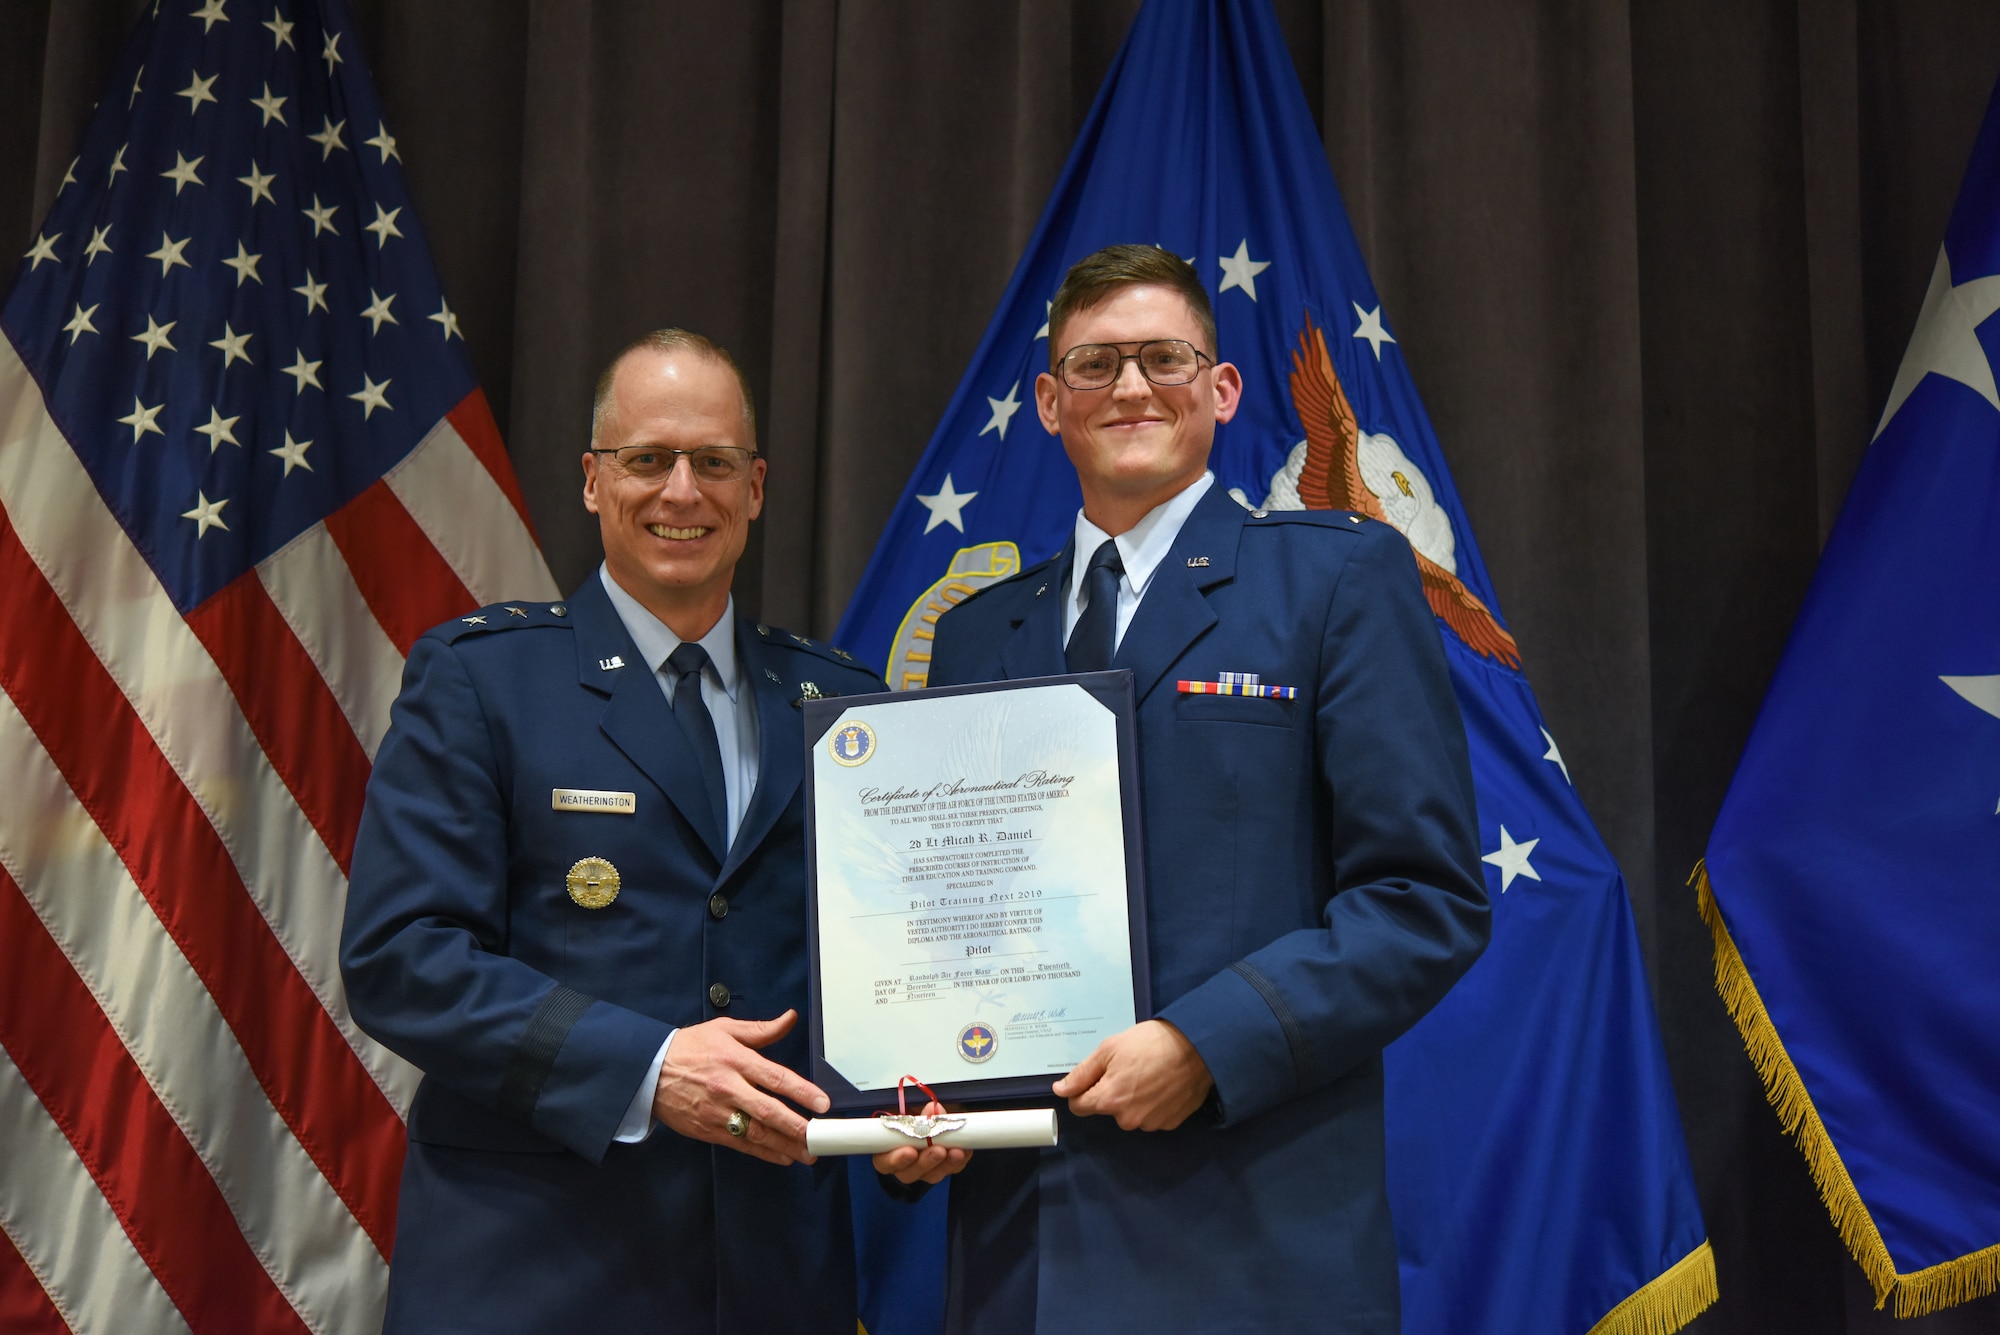 Maj. Gen. Mark Weatherington, Air Education and Training Command deputy commander, presents 2nd Lt. Micah Daniel with his pilot’s wings during a dual commissioning and “winging” ceremony Dec. 19, 2019, at Maxwell Air Force Base, Alabama. Daniel made history as one of the first prior-enlisted Airmen to receive pilot’s wings at the same time as his lieutenant’s bars. (U.S. Air Force photo by Staff Sgt. Quay Drawdy)